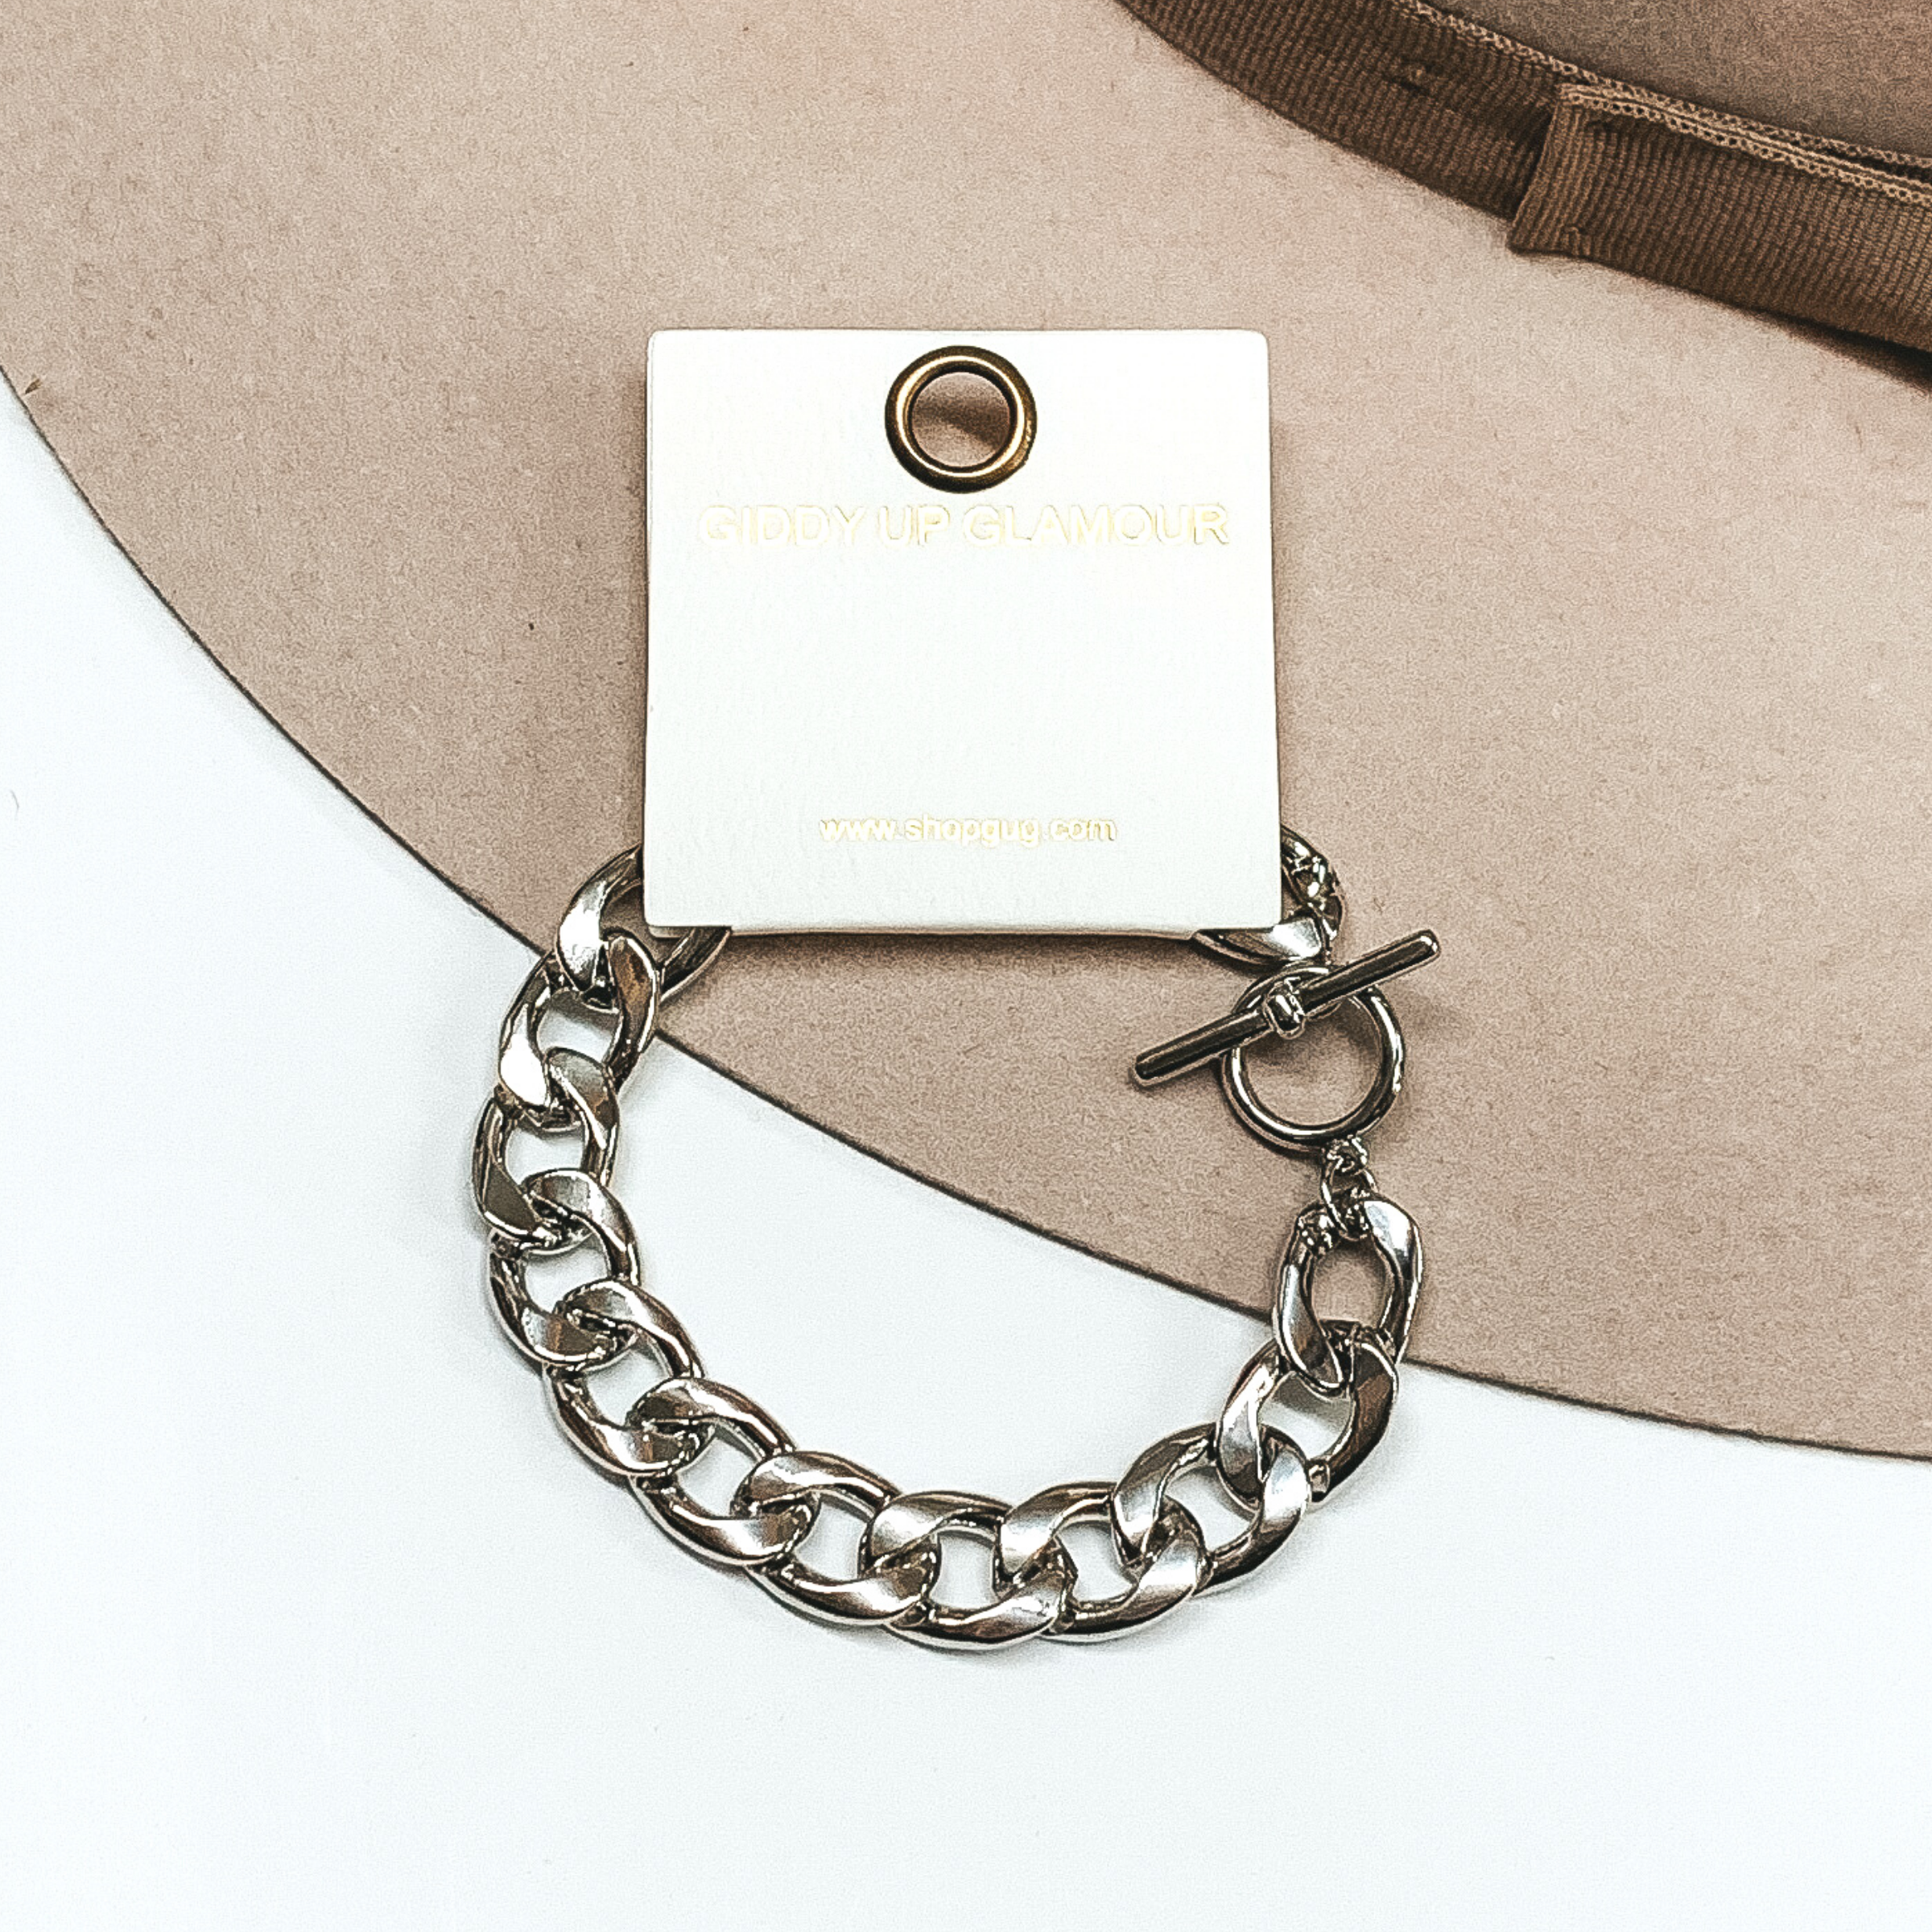 This silver chunky chain bracelet has a bar toggle clasp and is on a square tag. This bracelet is pictured on a white and beige background. 